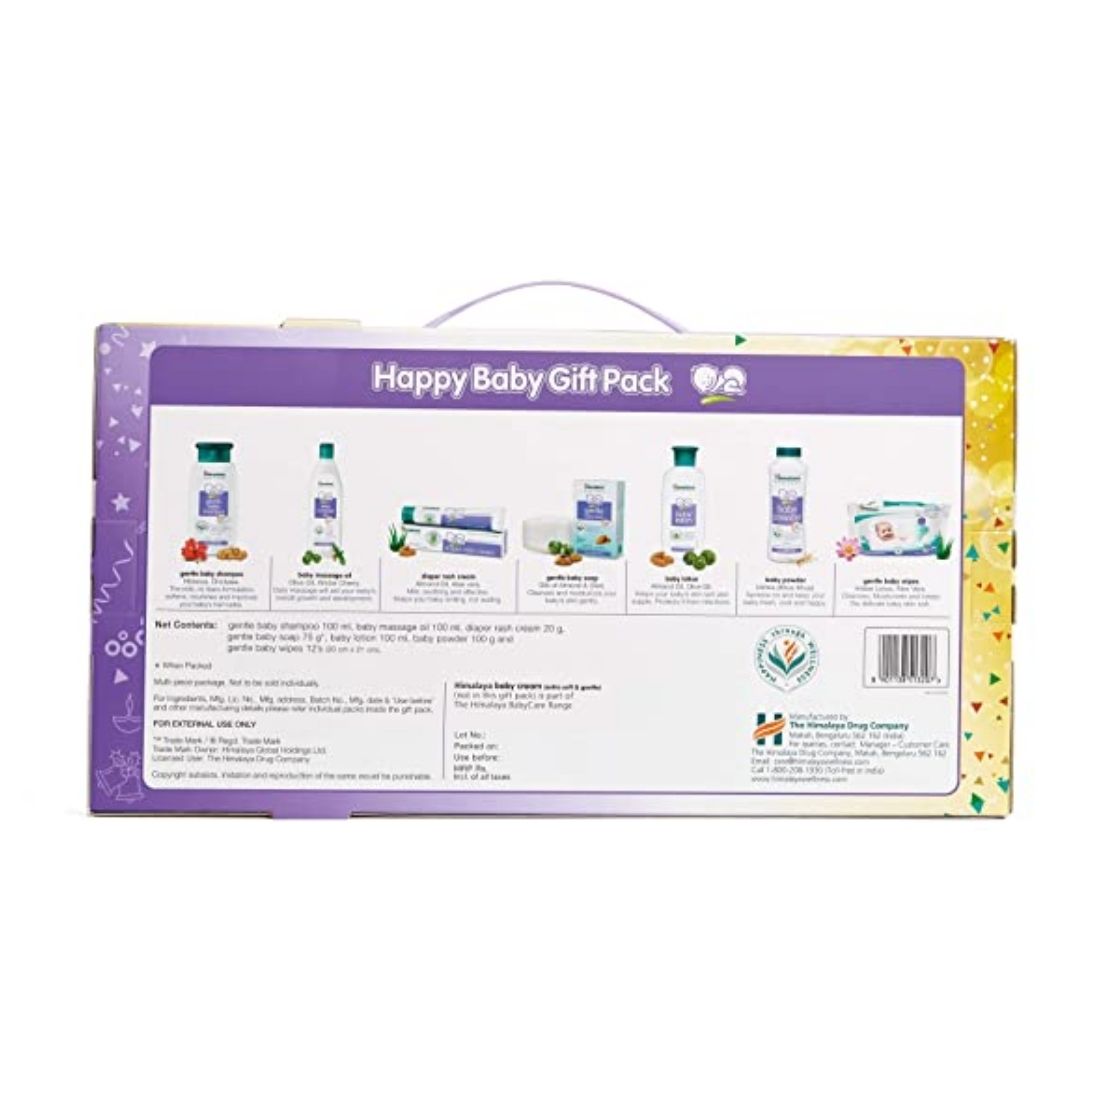 Himalaya Baby Gift Pack, 7 in 1 Gift Pack